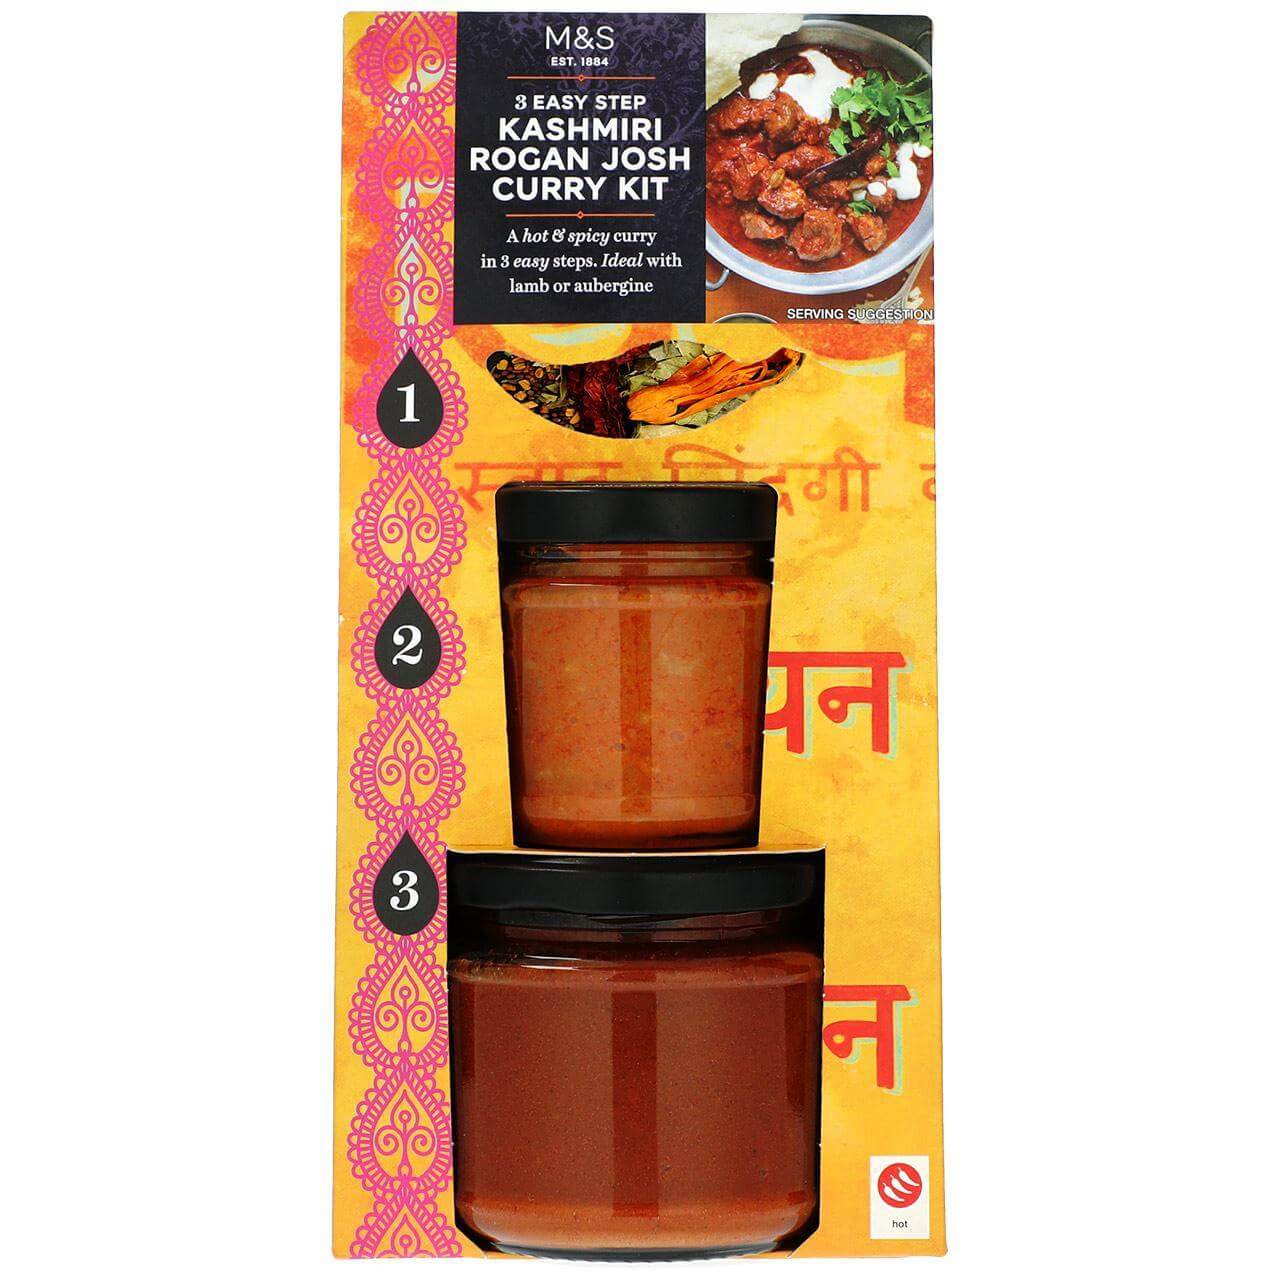 Image of M&S Kashmiri Rogan Josh Curry Kit made in the UK by Marks & Spencer Food. Buying this product supports a UK business, jobs and the local community